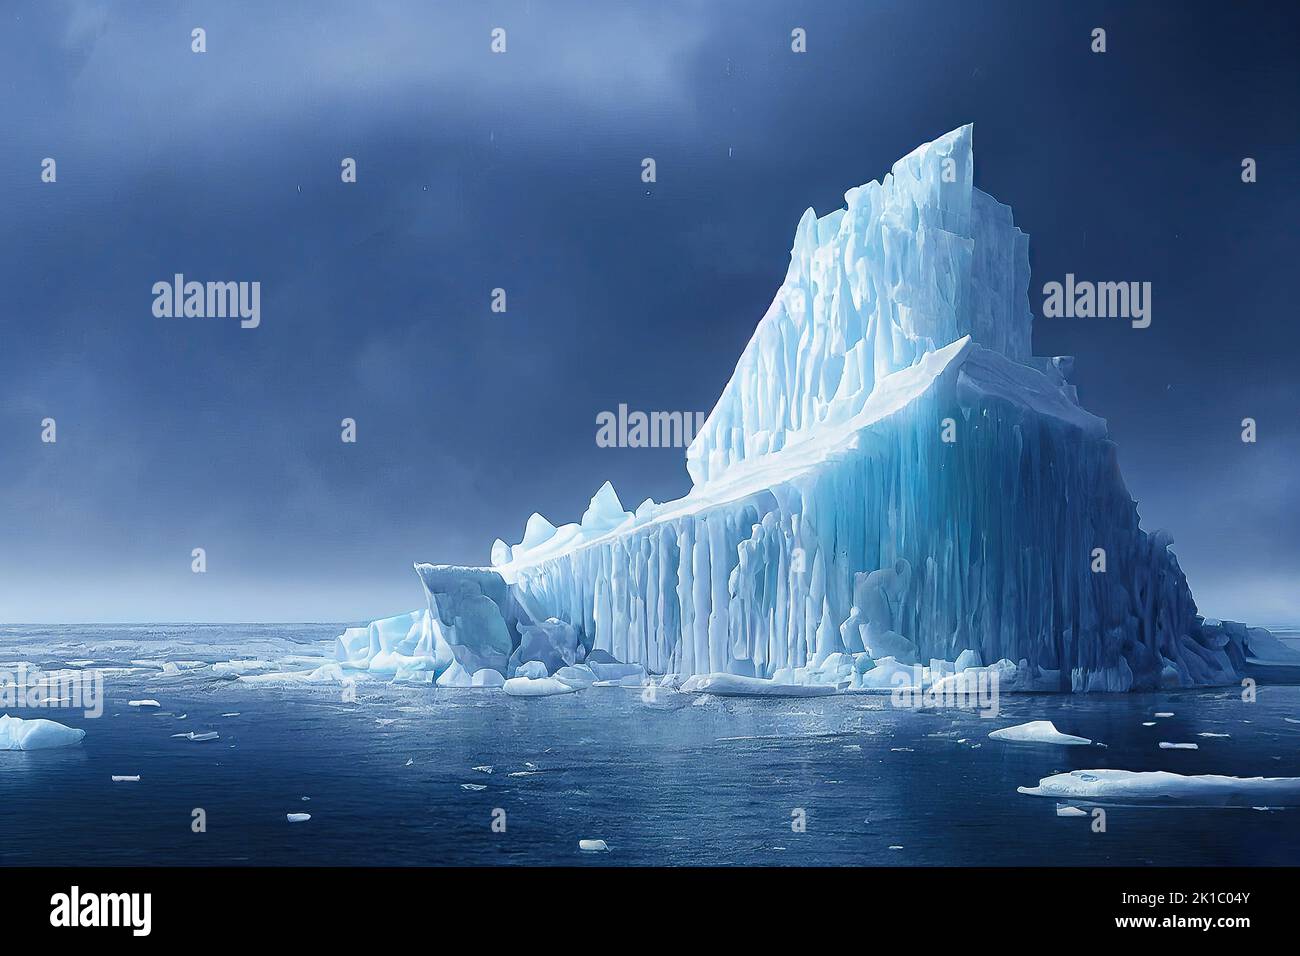 Global warming and climate change illustrated by iceberg melting in the Arctic Ocean at dawn. 3D illustration and digital painting. Stock Photo